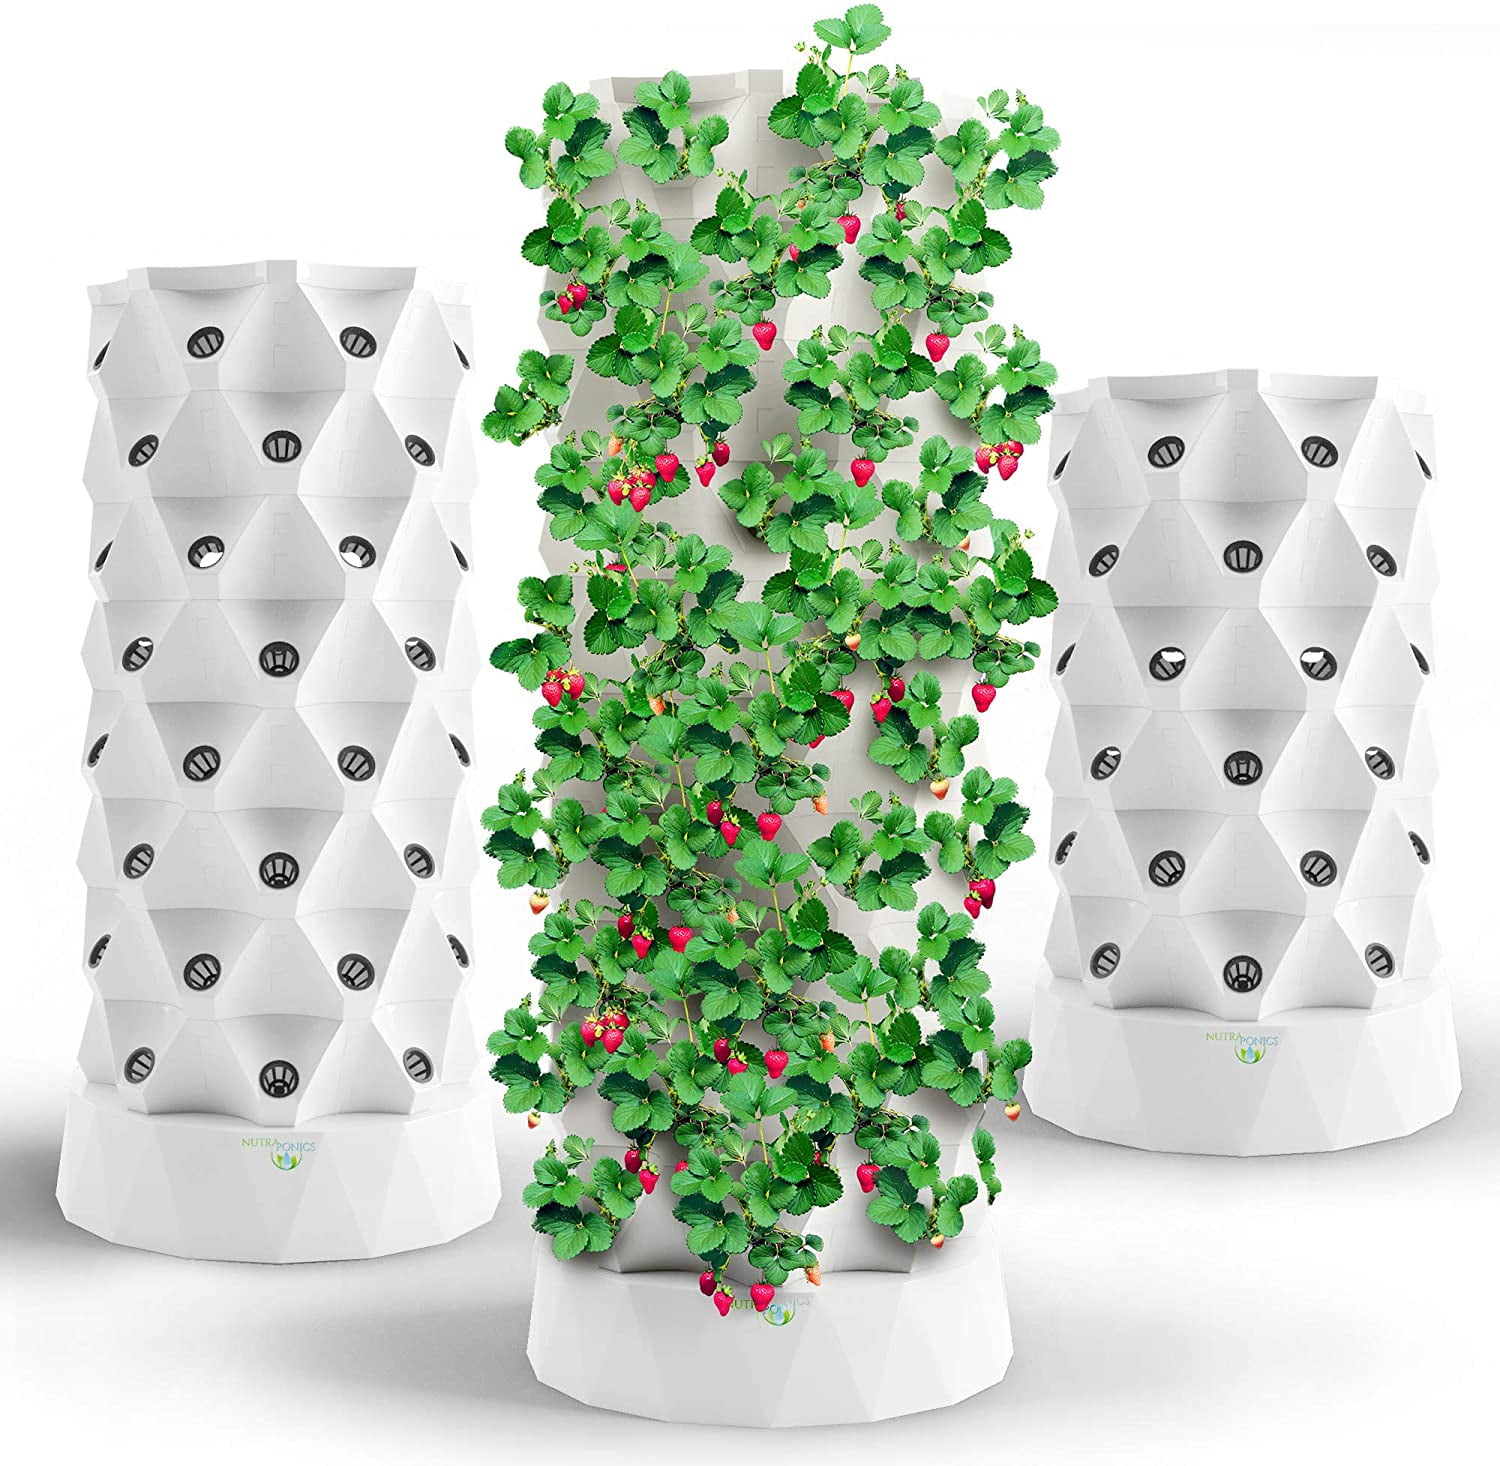 Details about   Hydroponic 18 Planting System Tower Organic Planting kit 